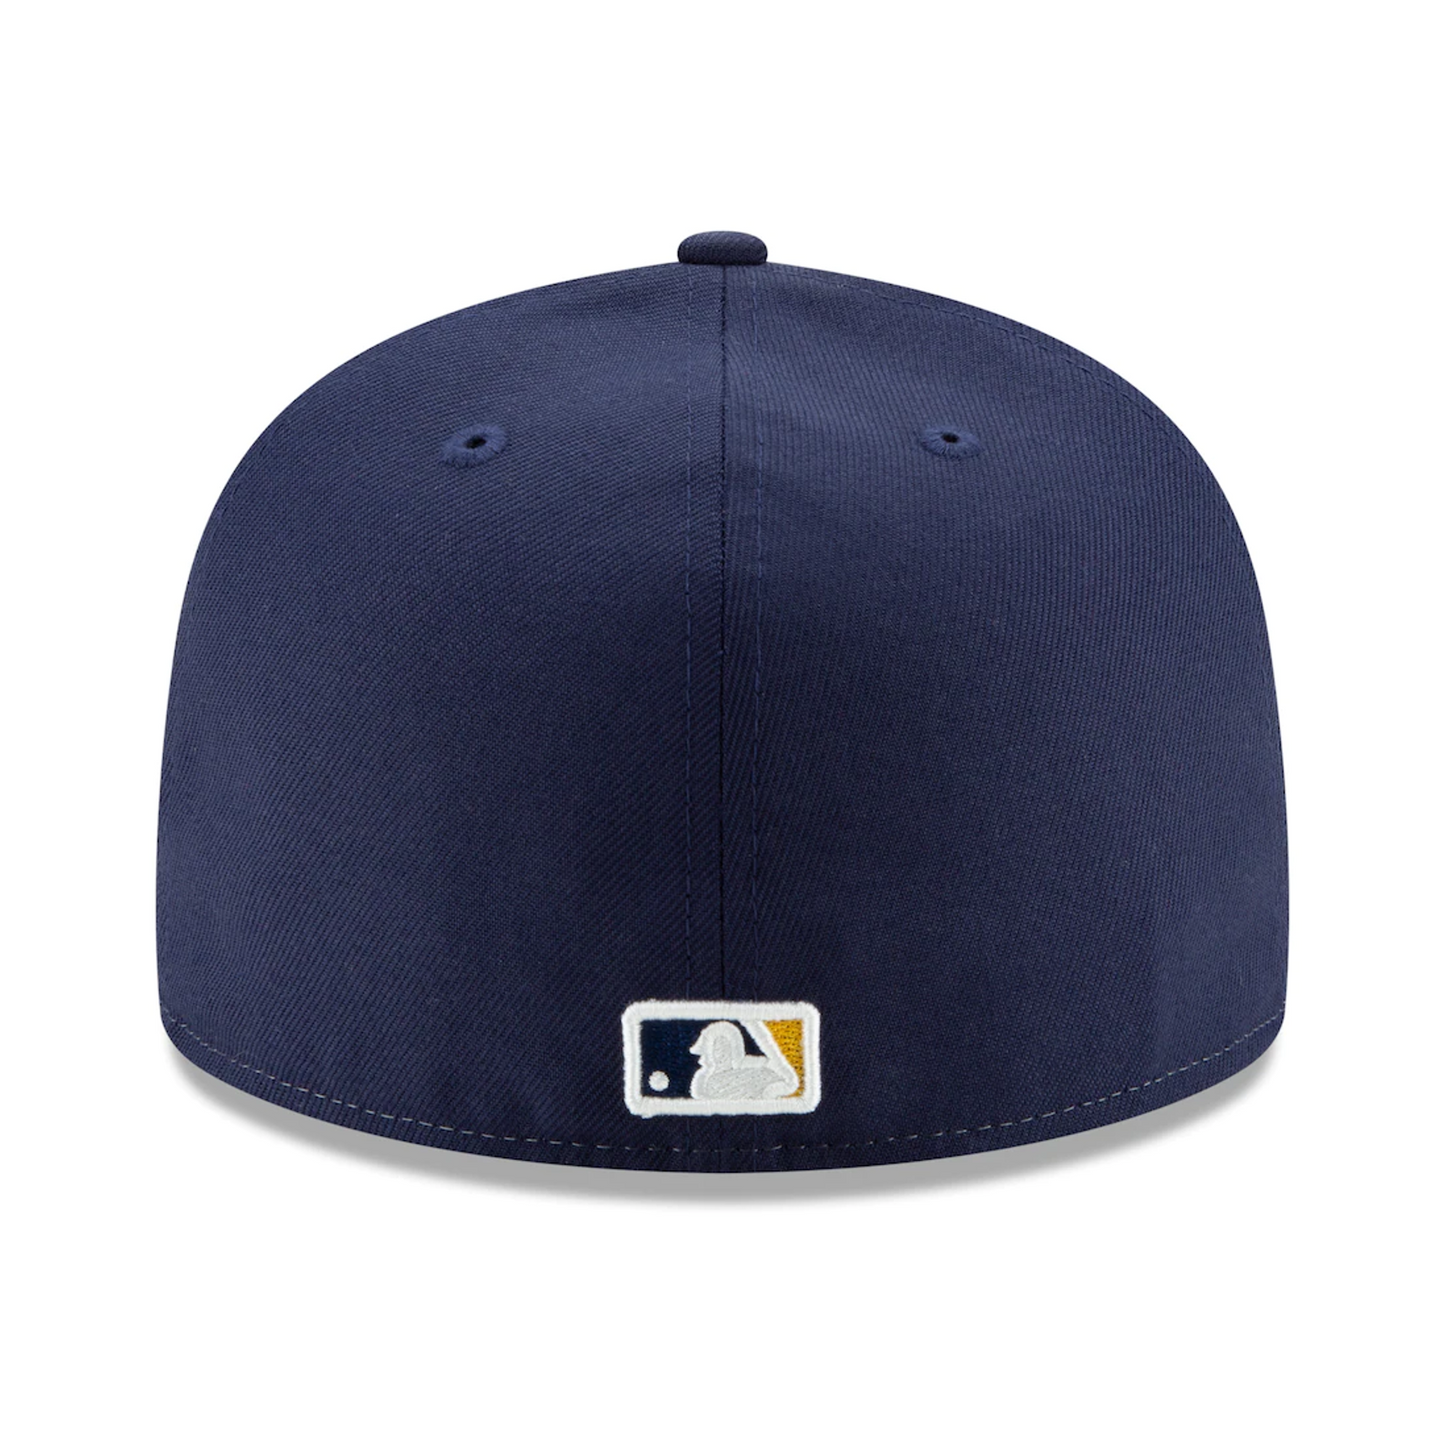 CASQUETTE 59FIFTY MLB BREWERS ALT